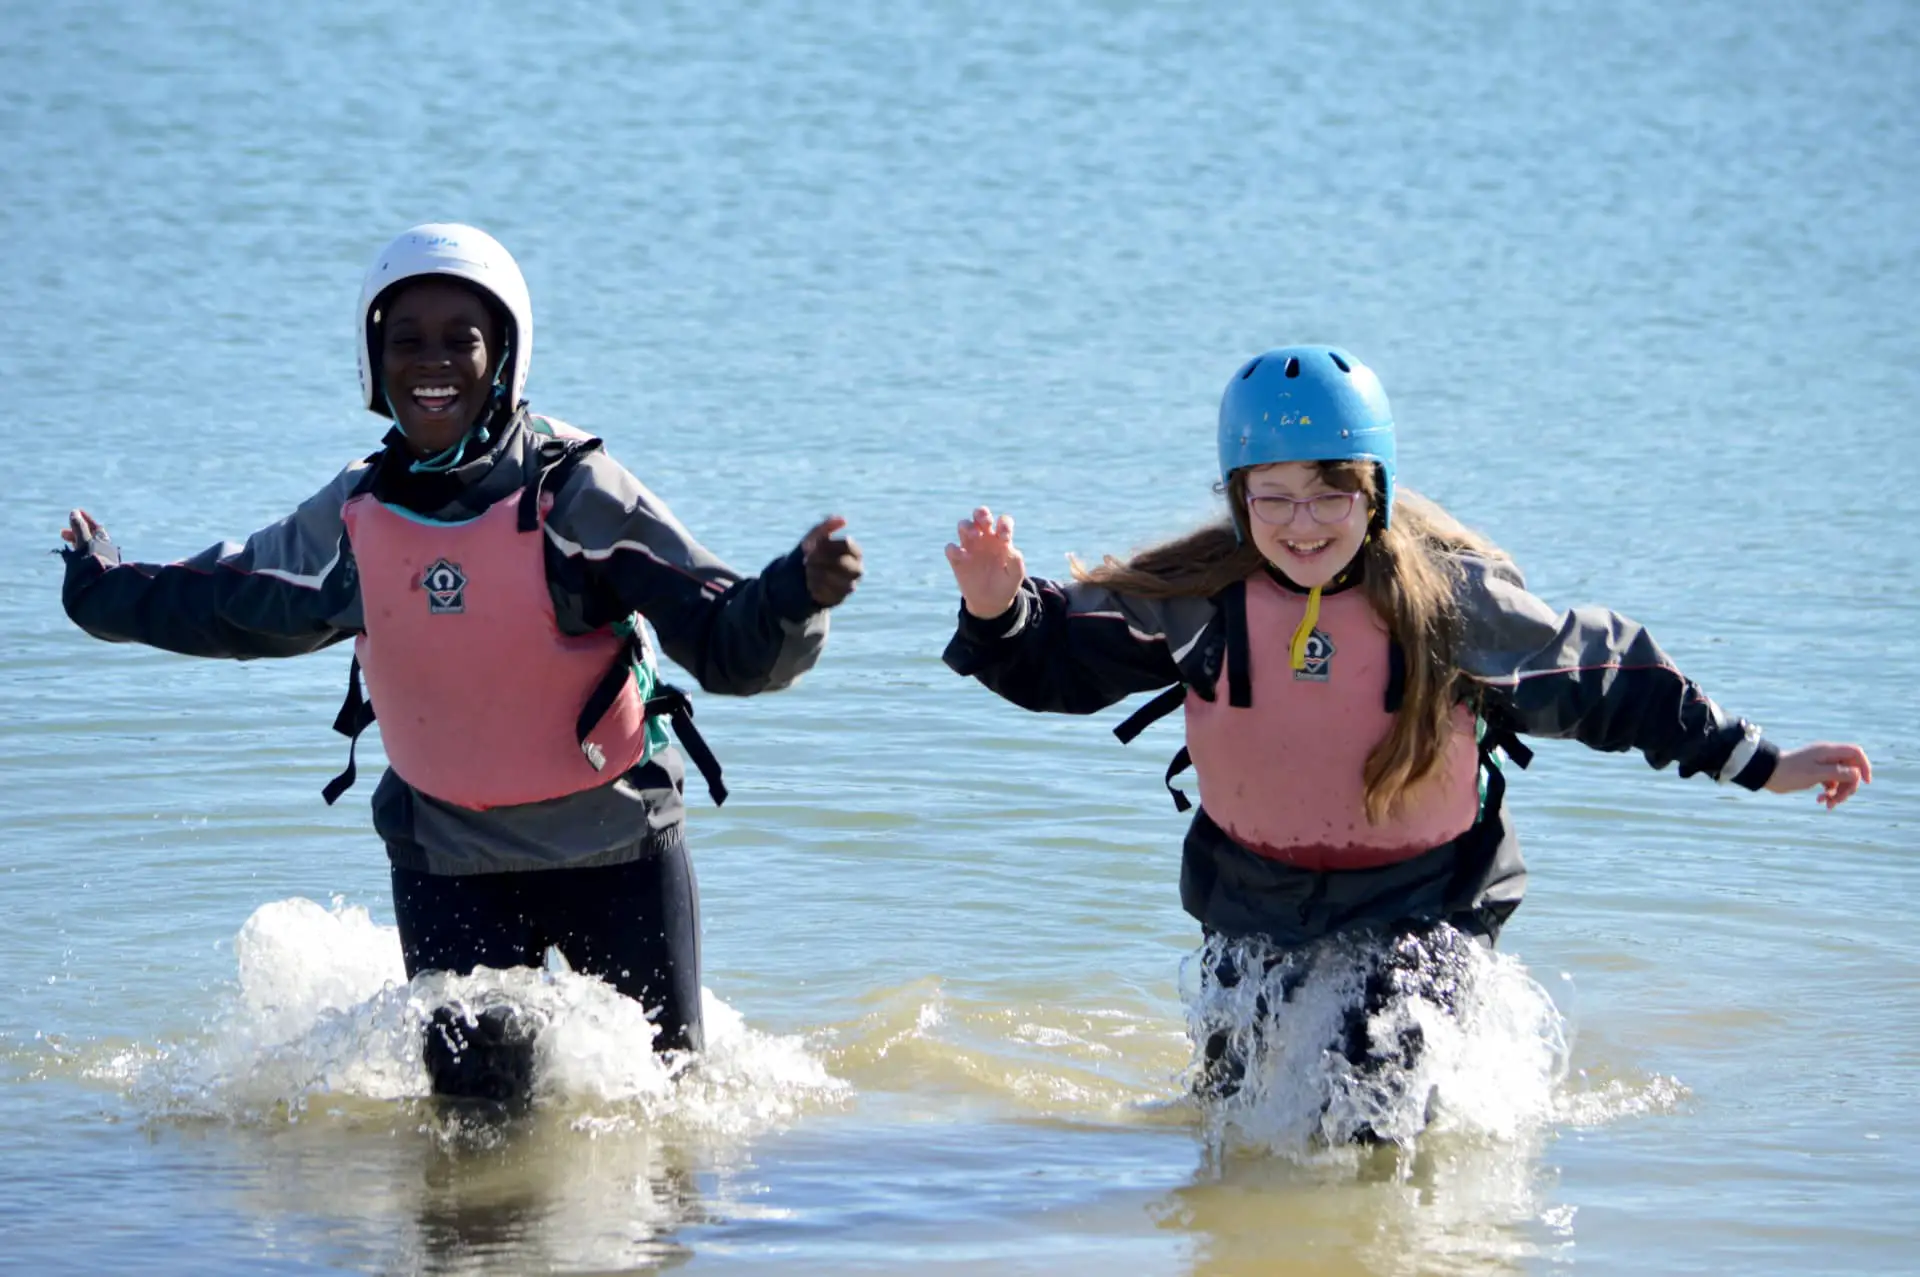 Two students at UKSA coming out of the water